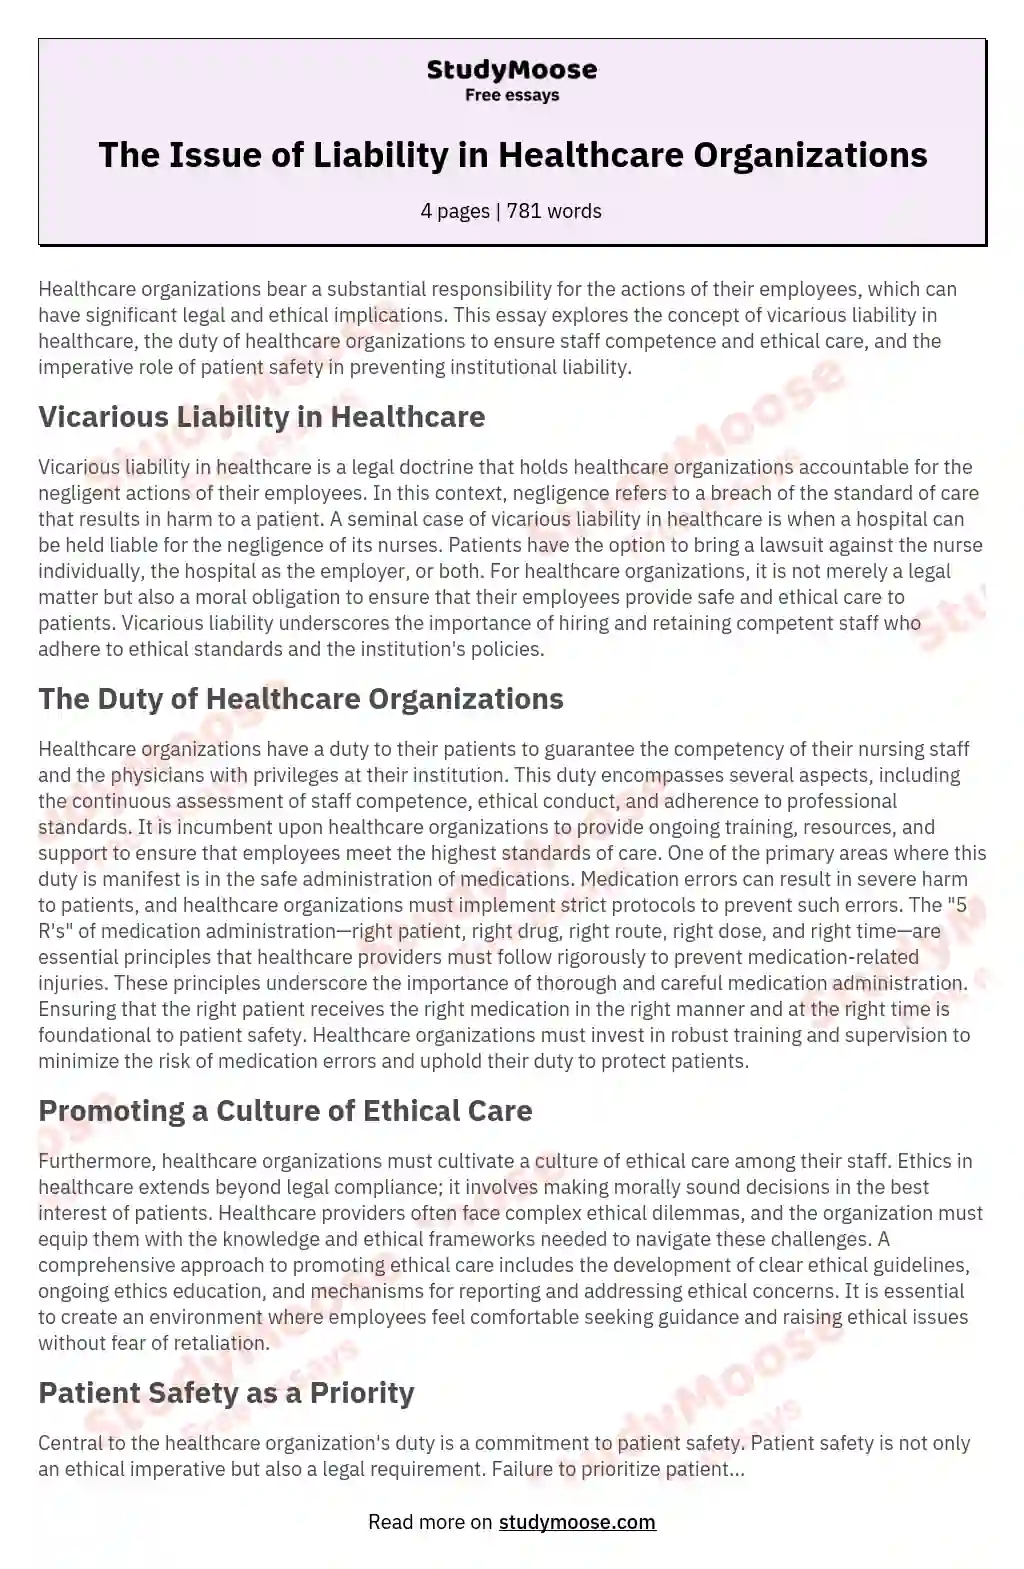 The Issue of Liability in Healthcare Organizations essay